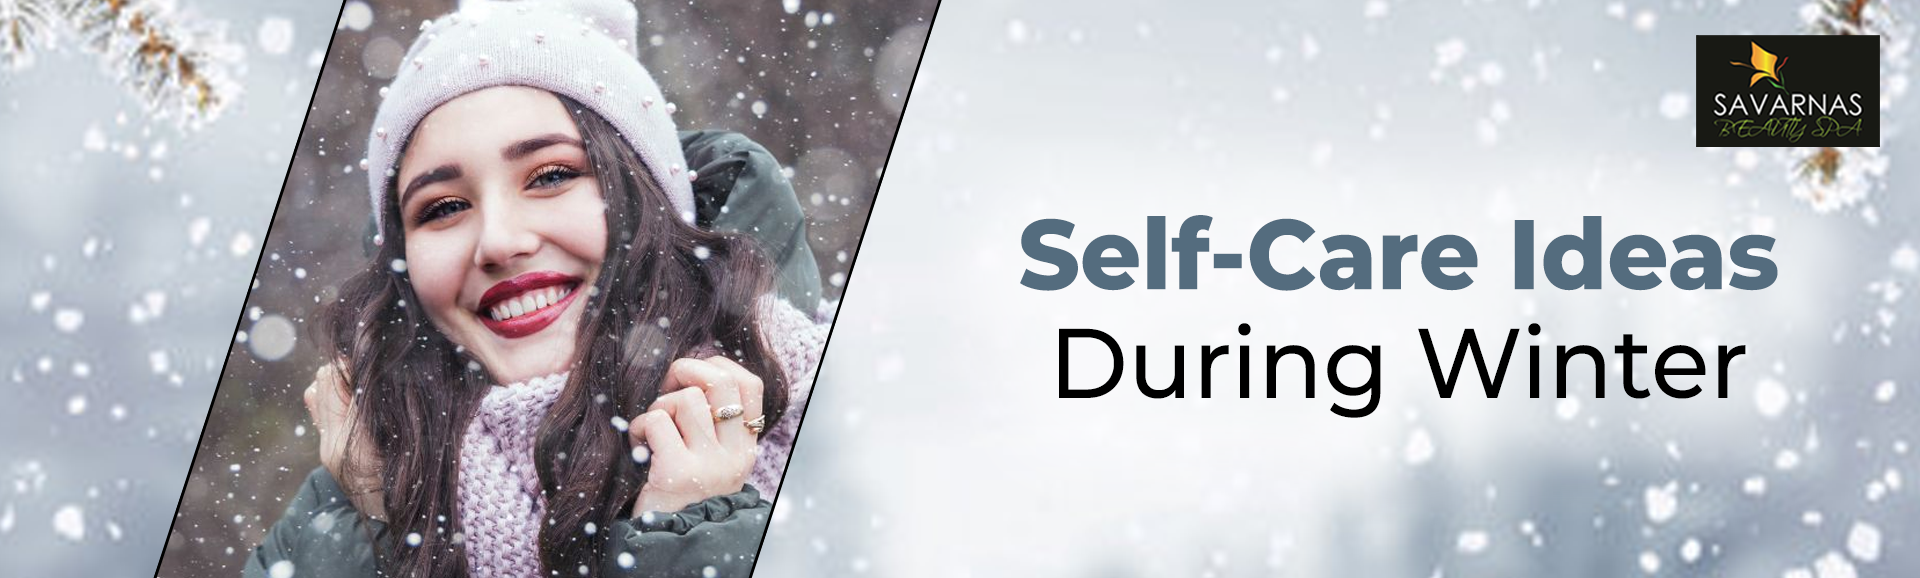 Self-Care Ideas During Winter